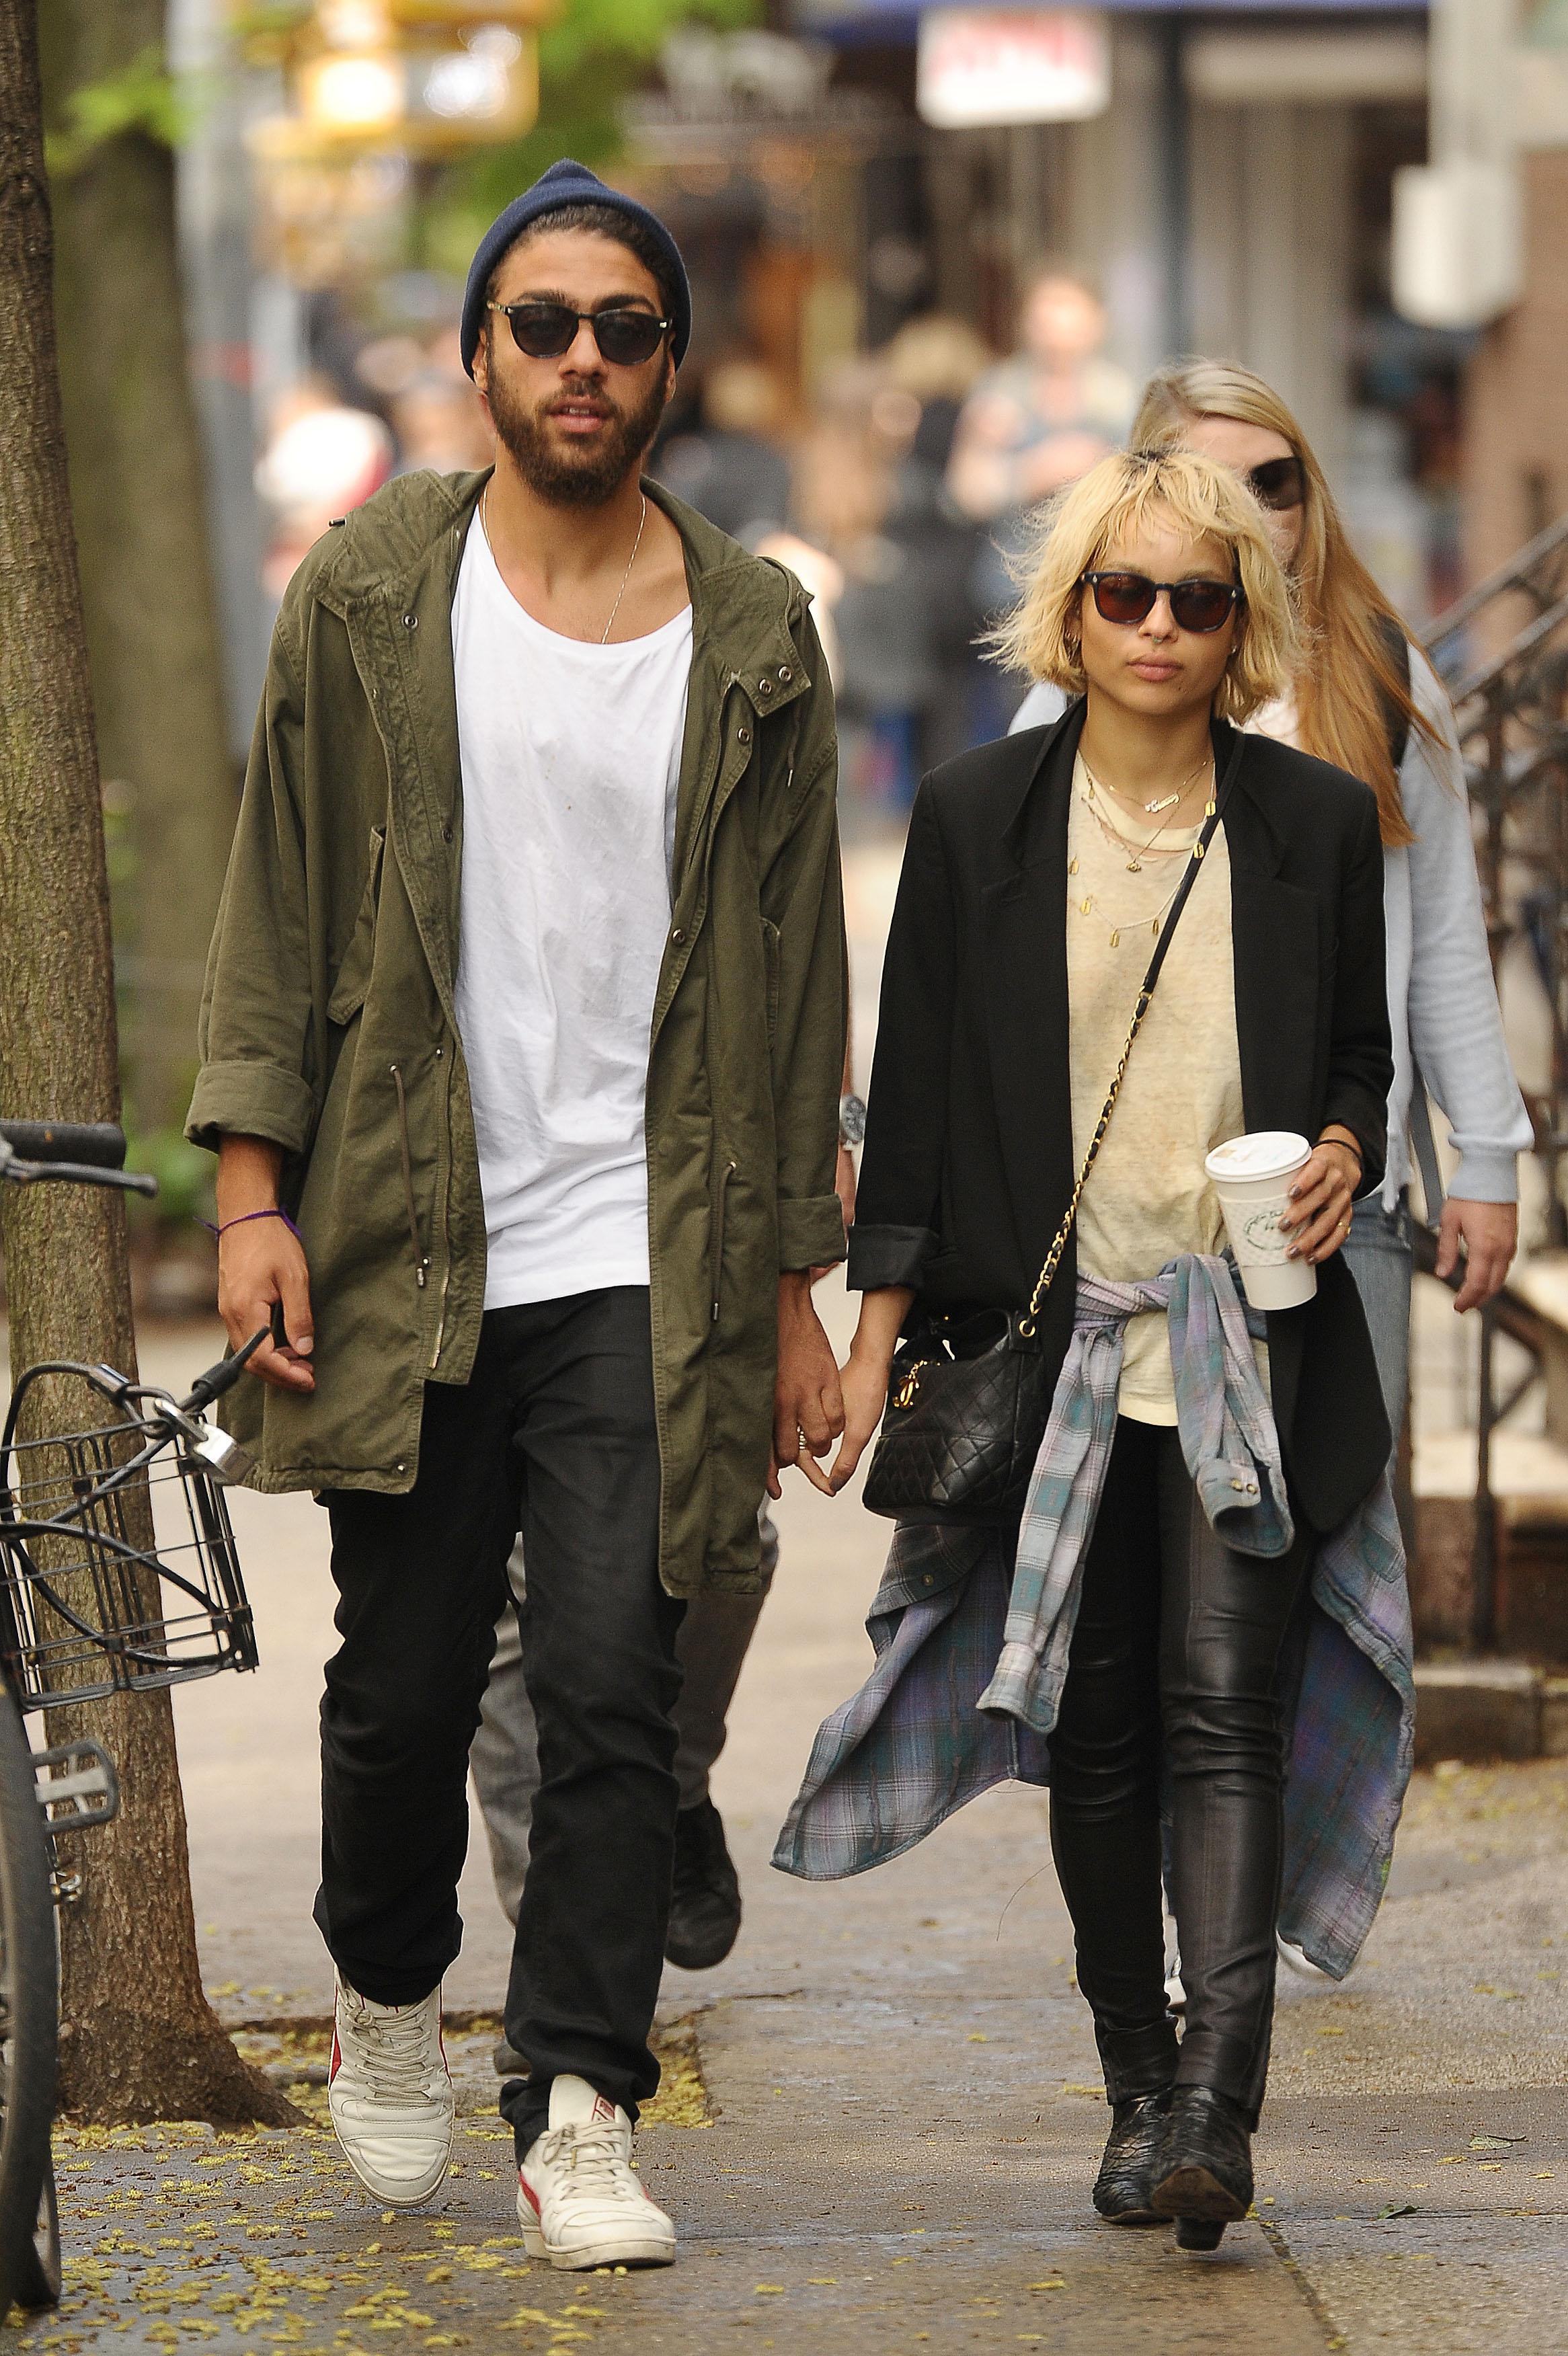 Zoe Kravitz holds hands with boyfriend Noah Gabriel as they stroll through the East Village, NYC